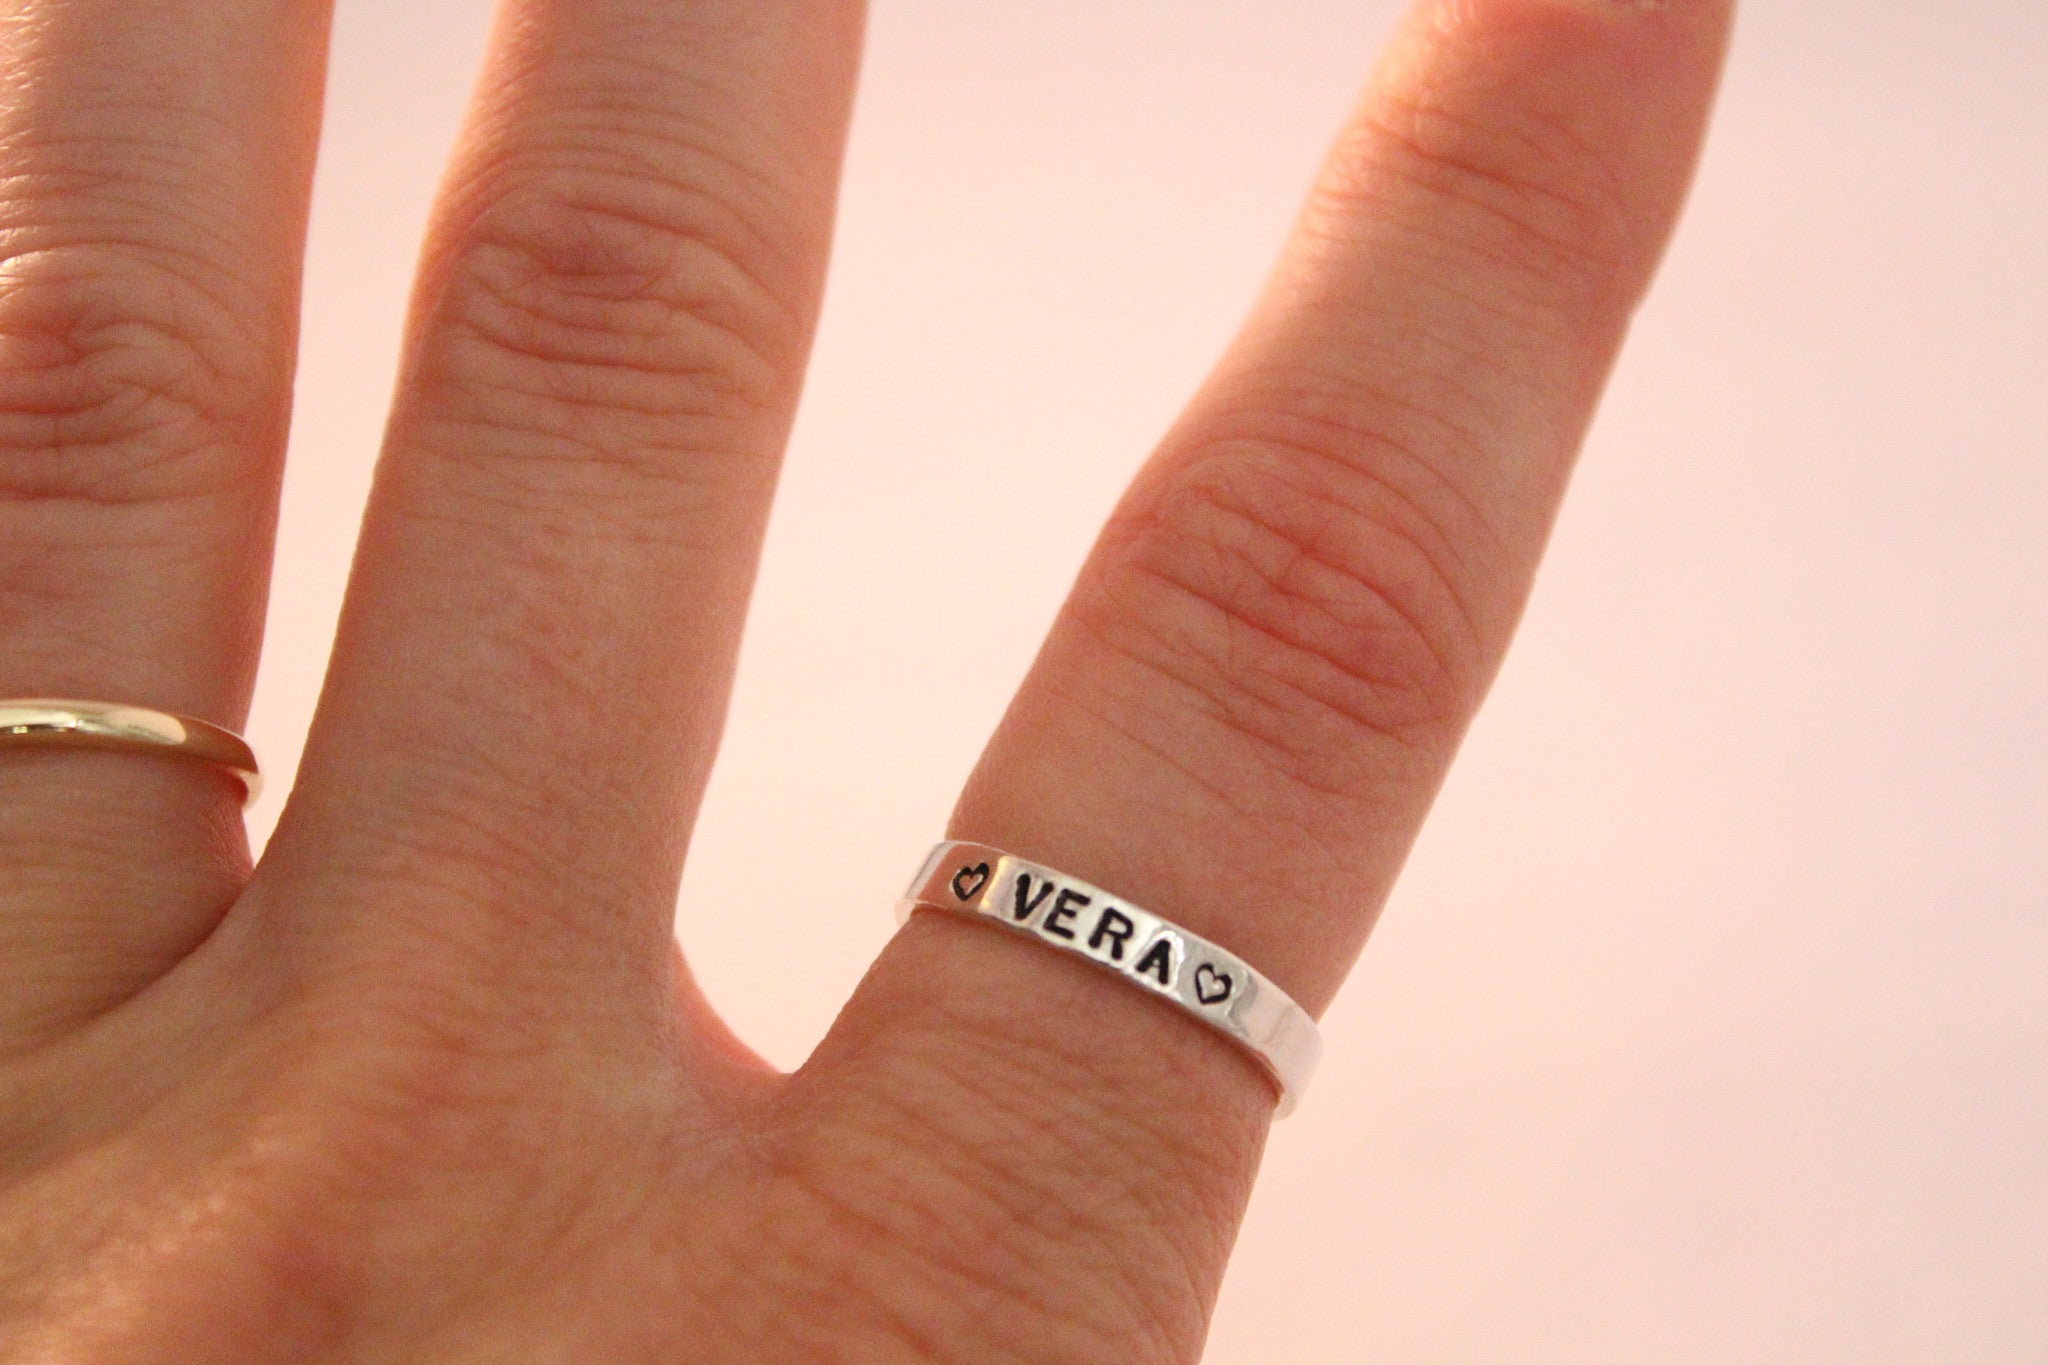 Personalized name ring, band, stacking ring